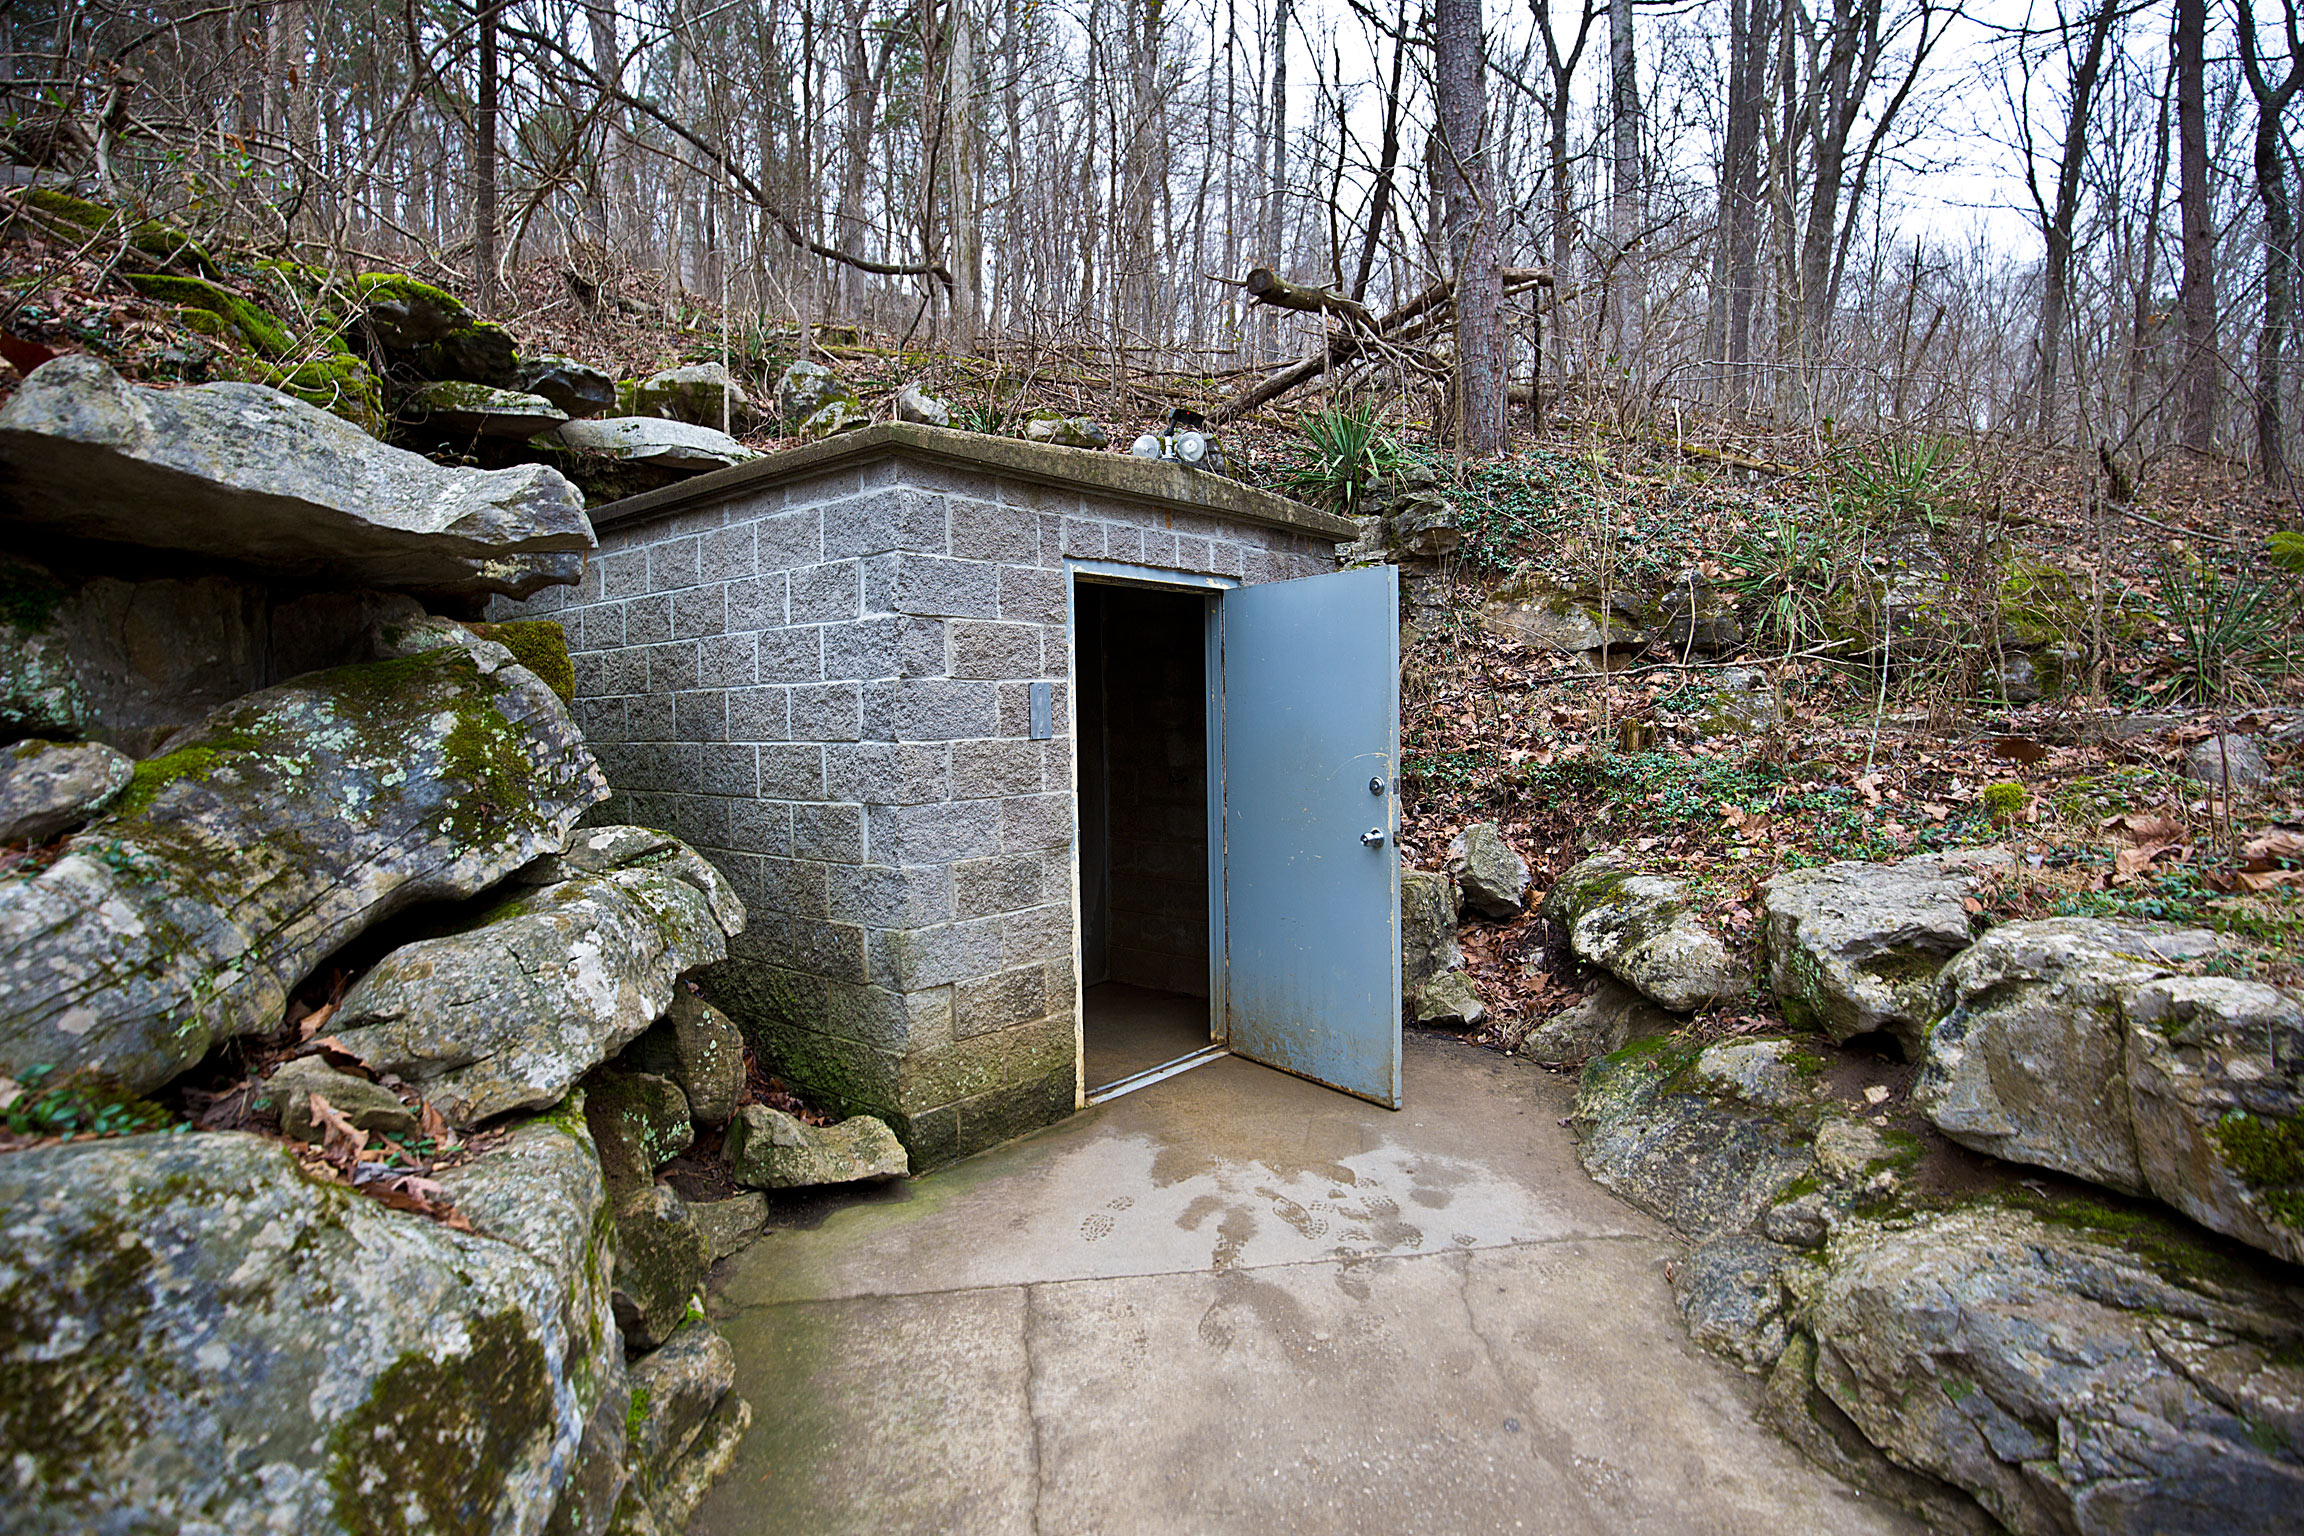 A man-made entrance to Mammoth Cave